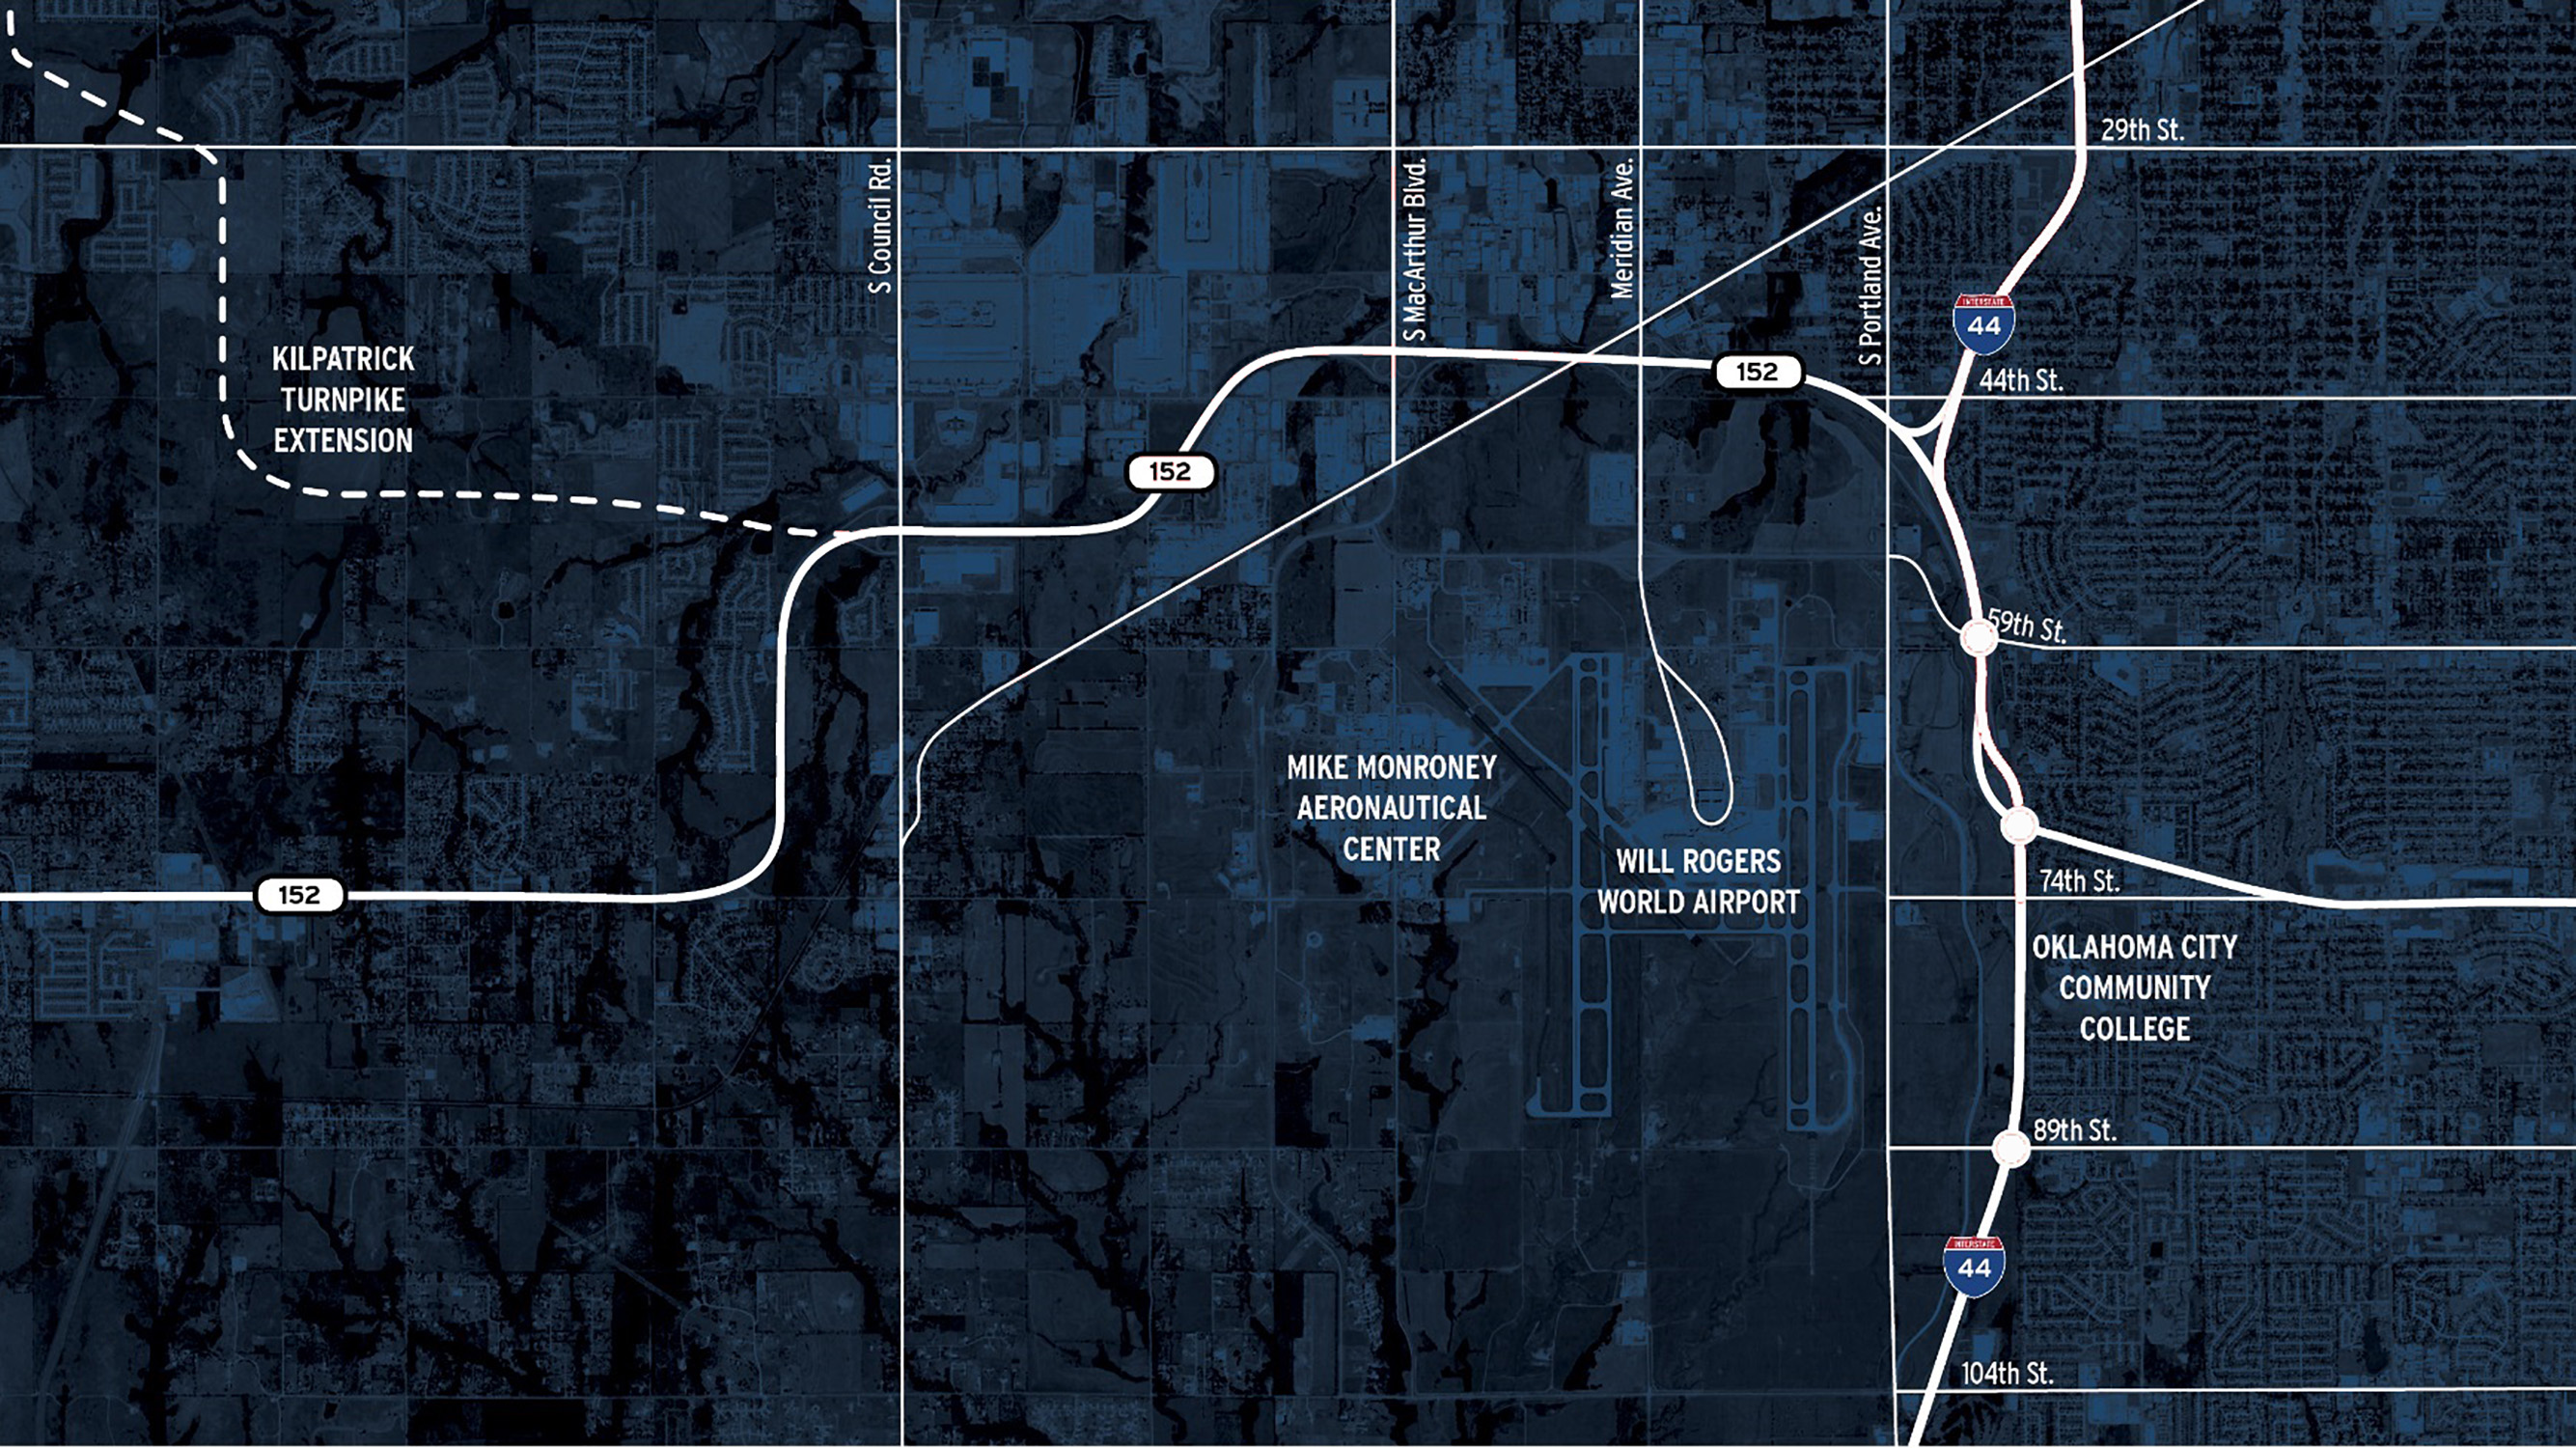 Map of SH-152 and I-44 corridors in OKC